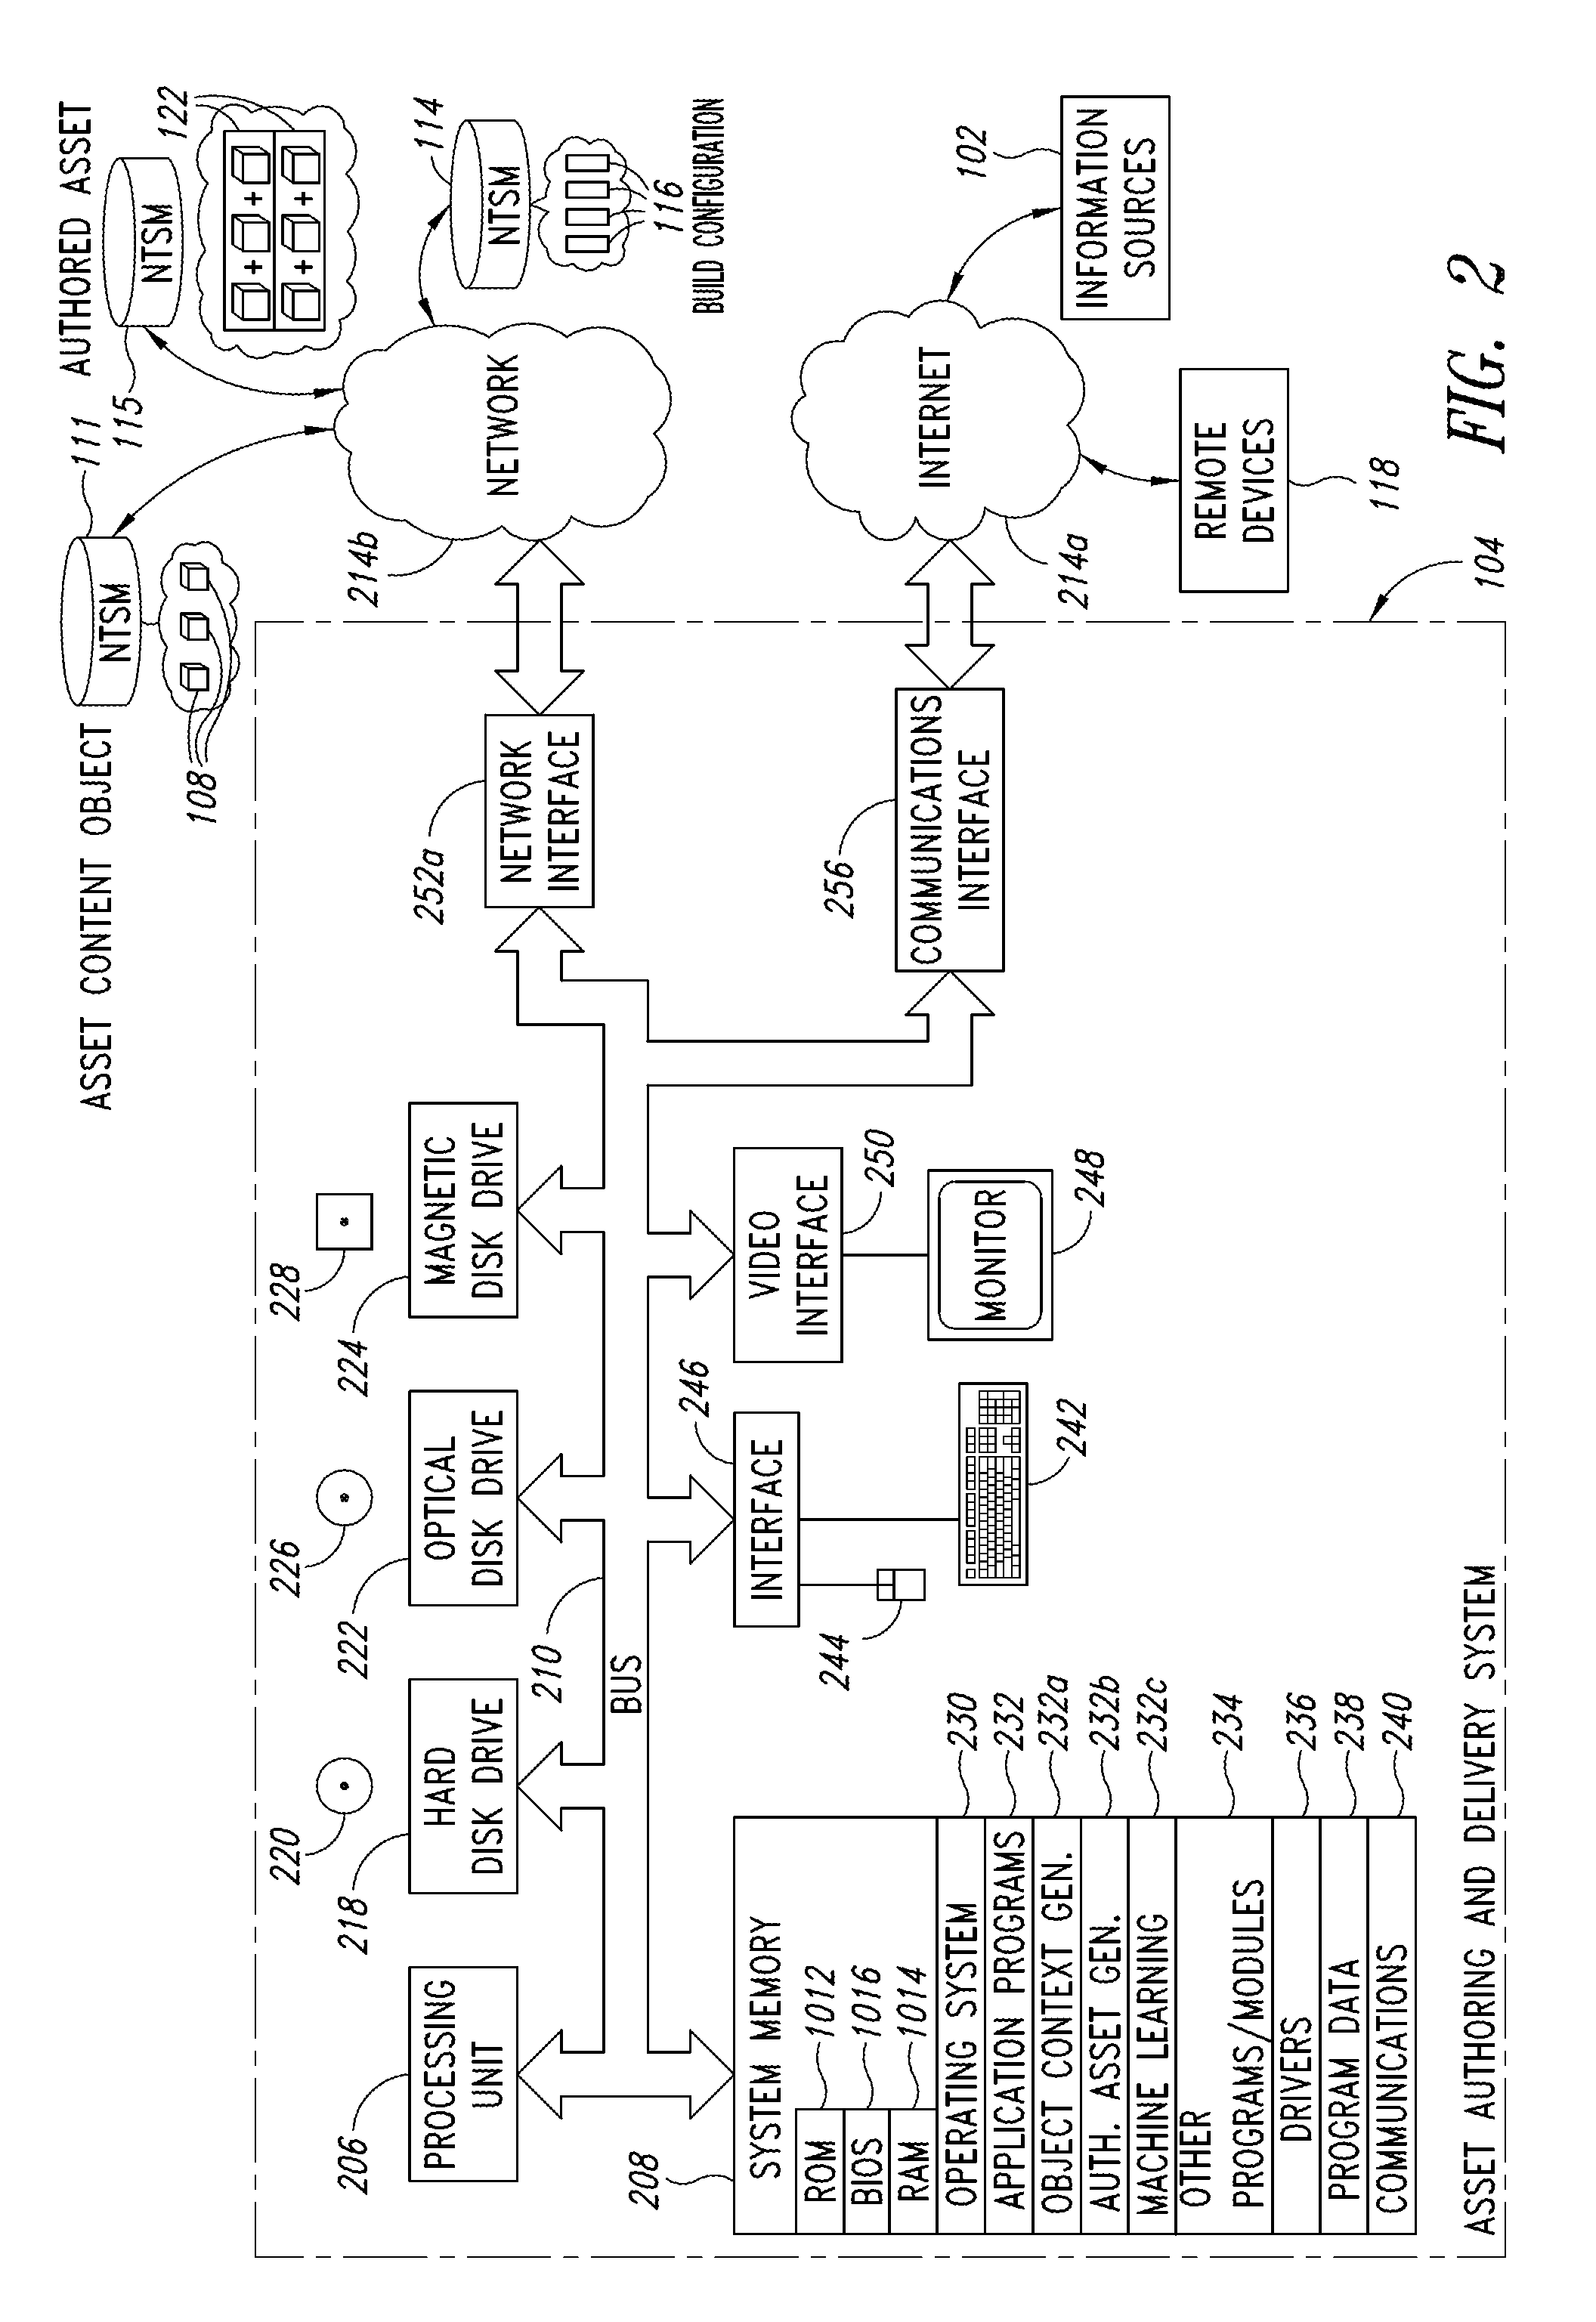 Systems and methods of creating and delivering item of manufacture specific information to remote devices